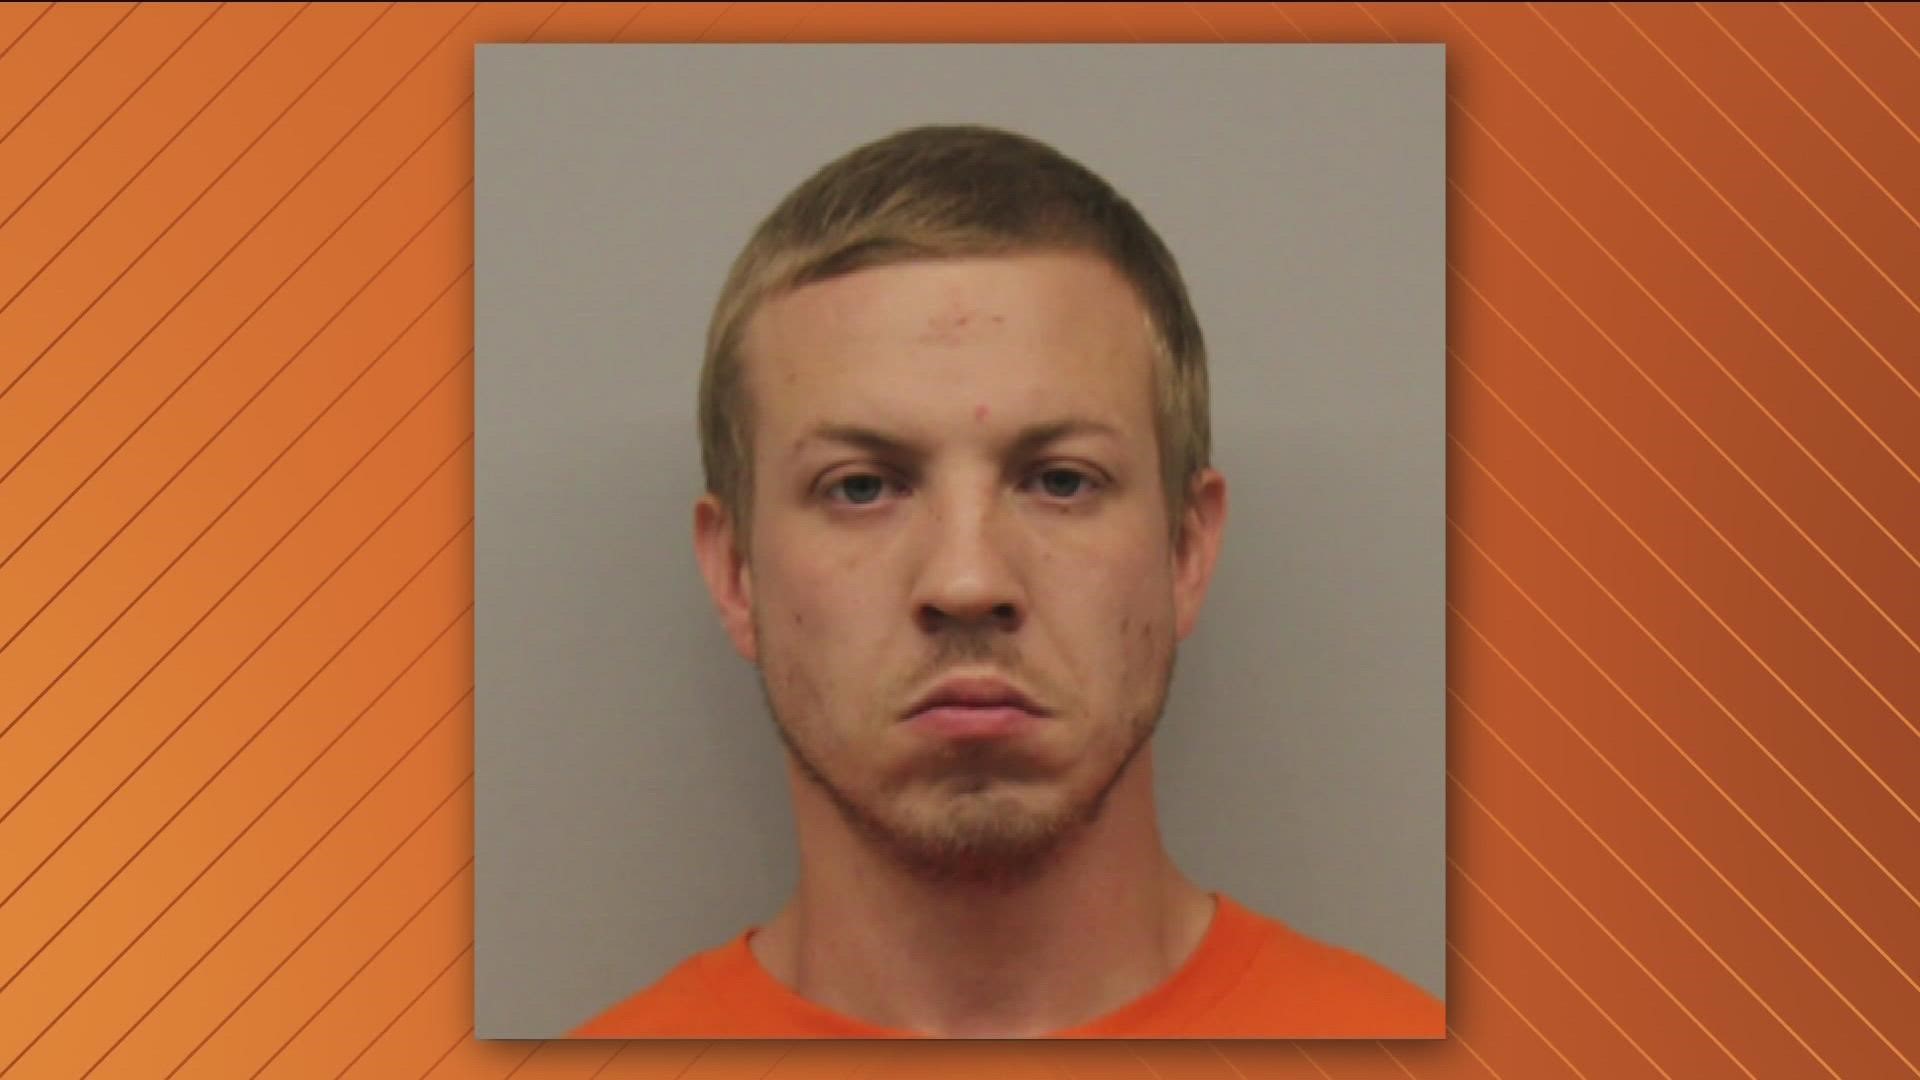 John Cody Hart was ordered to be committed to a facility while he receives restorative treatment, according to court records.